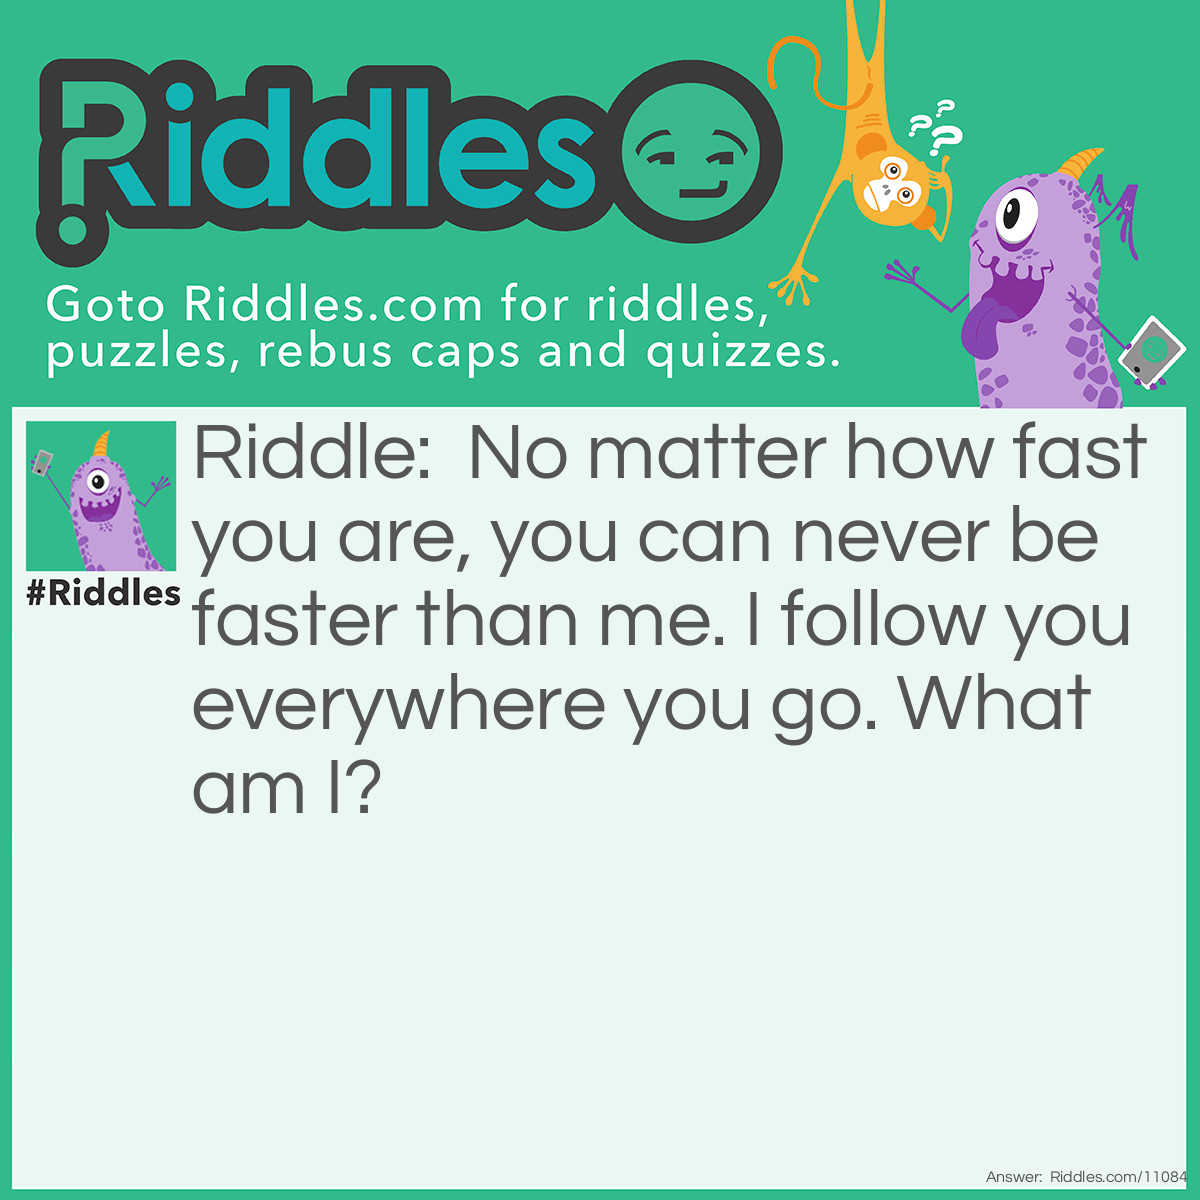 Riddle: No matter how fast you are, you can never be faster than me. I follow you everywhere you go. What am I? Answer: Shadow.